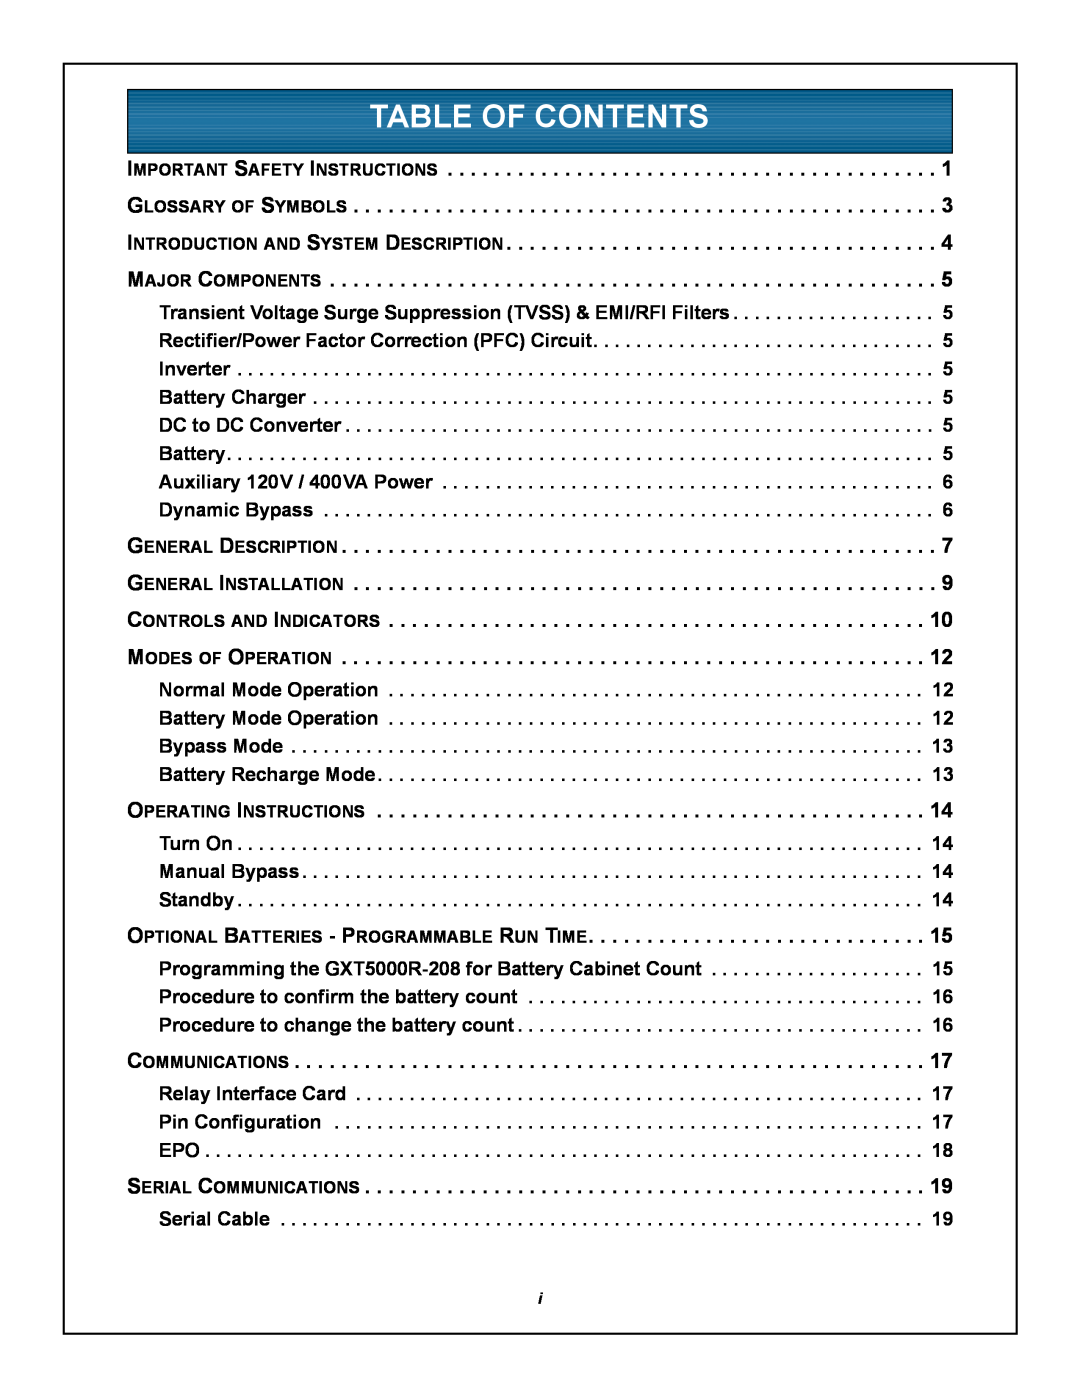 Emerson GXT5000R-208 user manual Table Of Contents 